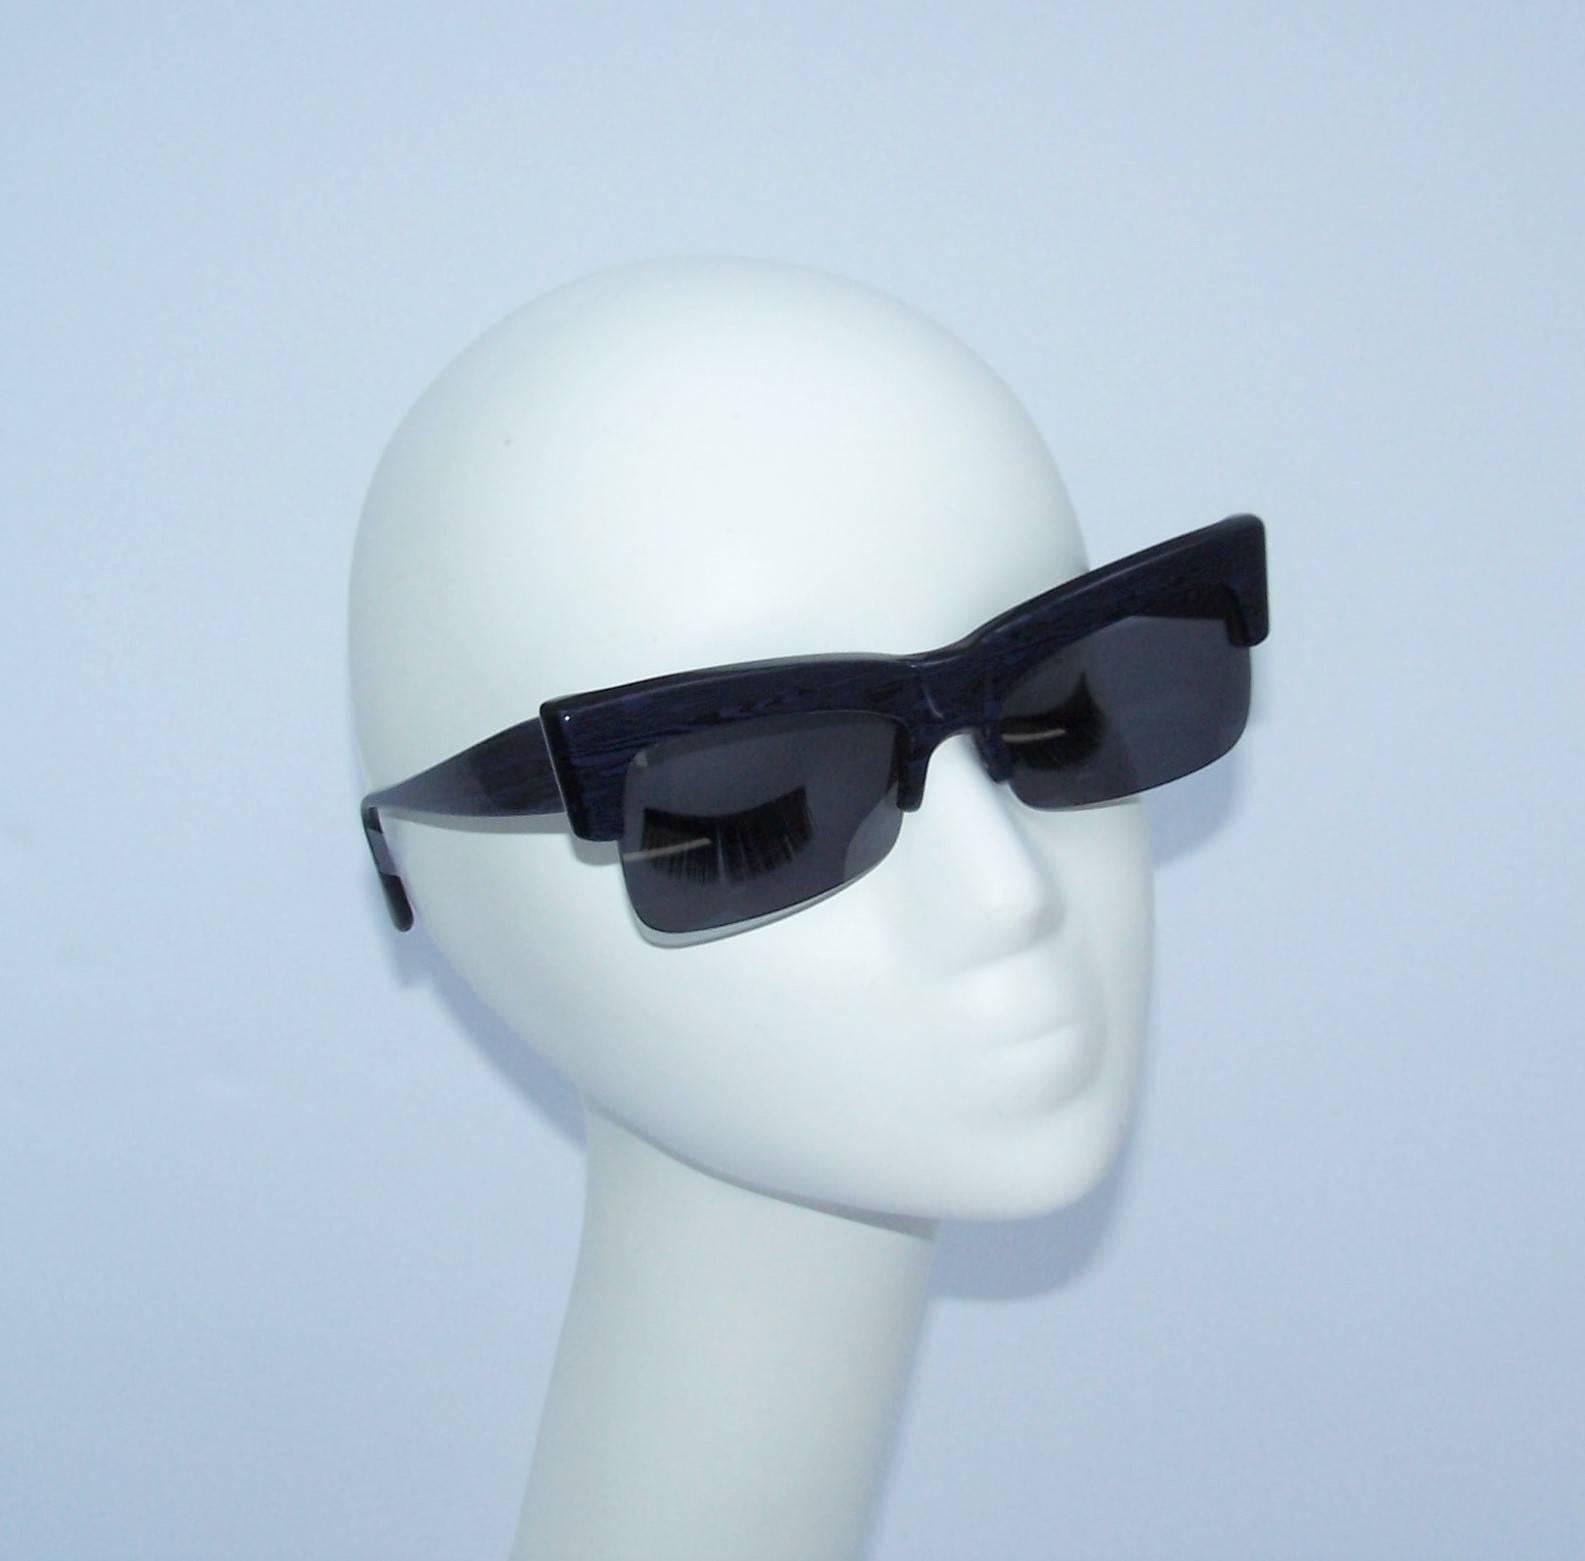 Don these futuristic Claude Montana sunglasses for instant cool factor.  The strong sculptural silhouette is created with a black and blue marbleized frame supporting open ended dark gray lenses.  Mr. Montana's revolutionary collaborations with